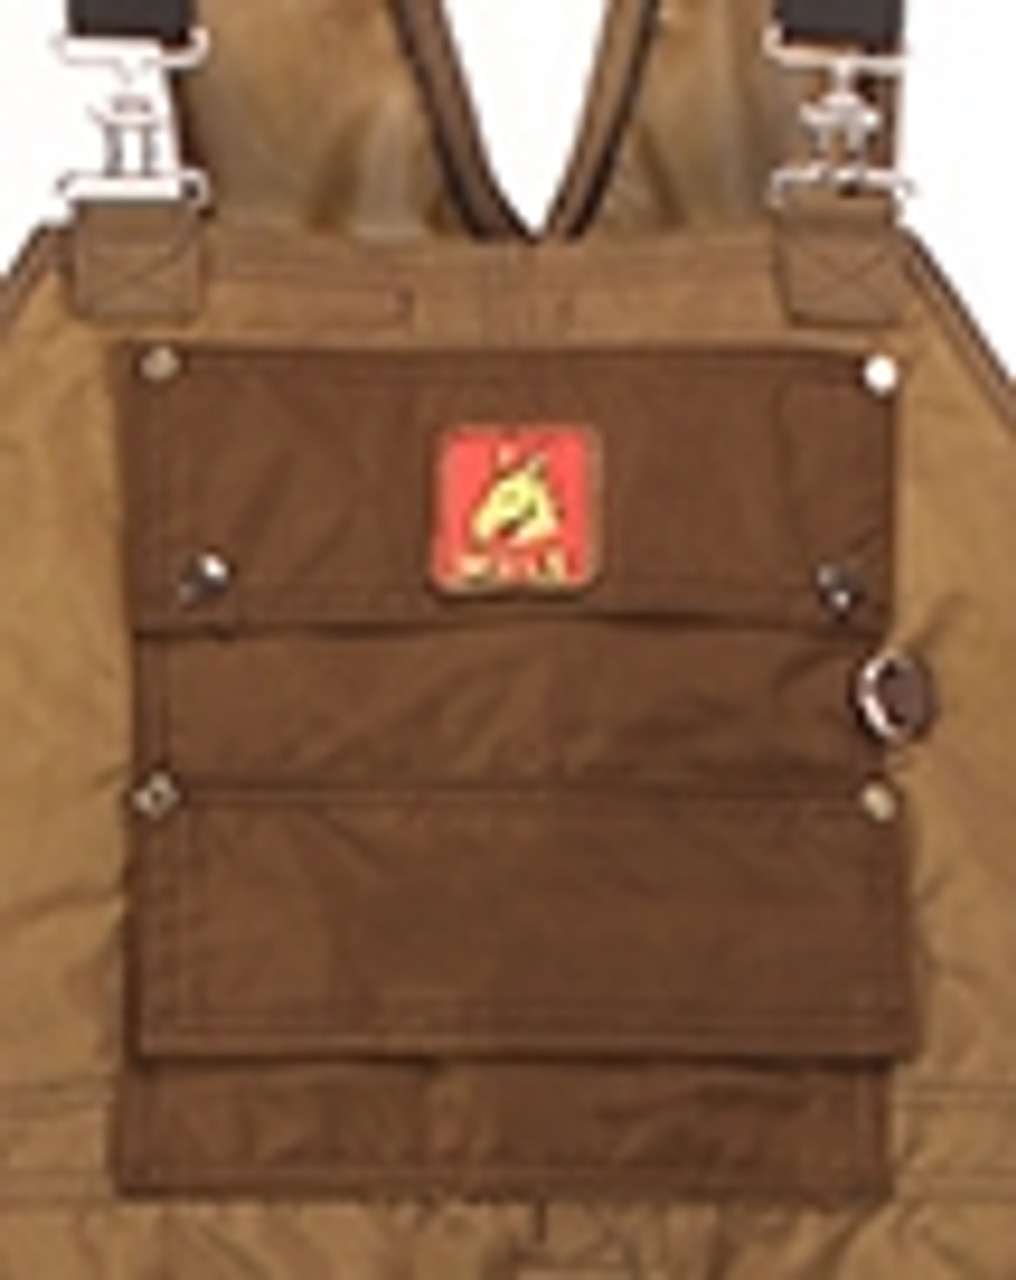 mule brand gear and apparel with chest pocket and separated shell loop pocket